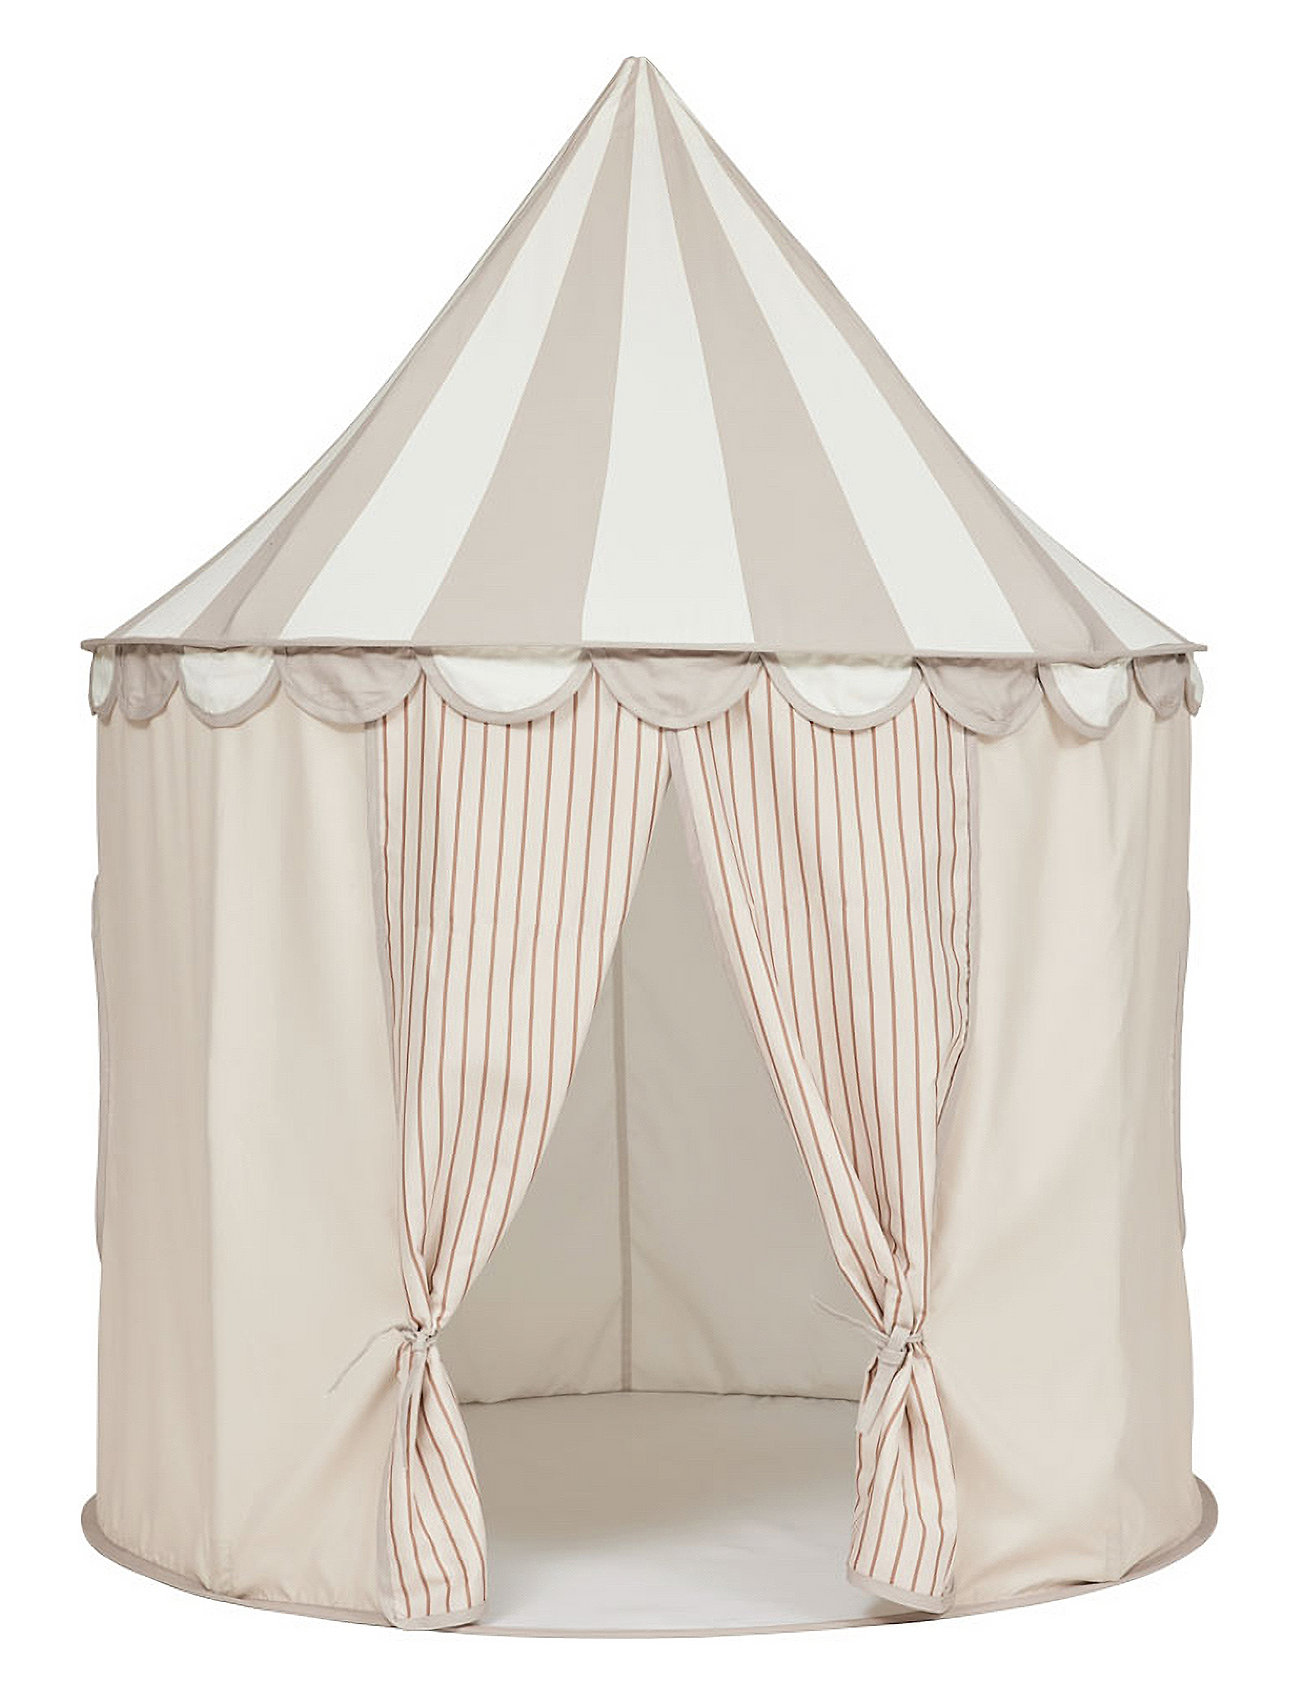 Circus Tent Toys Play Tents & Tunnels Play Tent Cream OYOY MINI